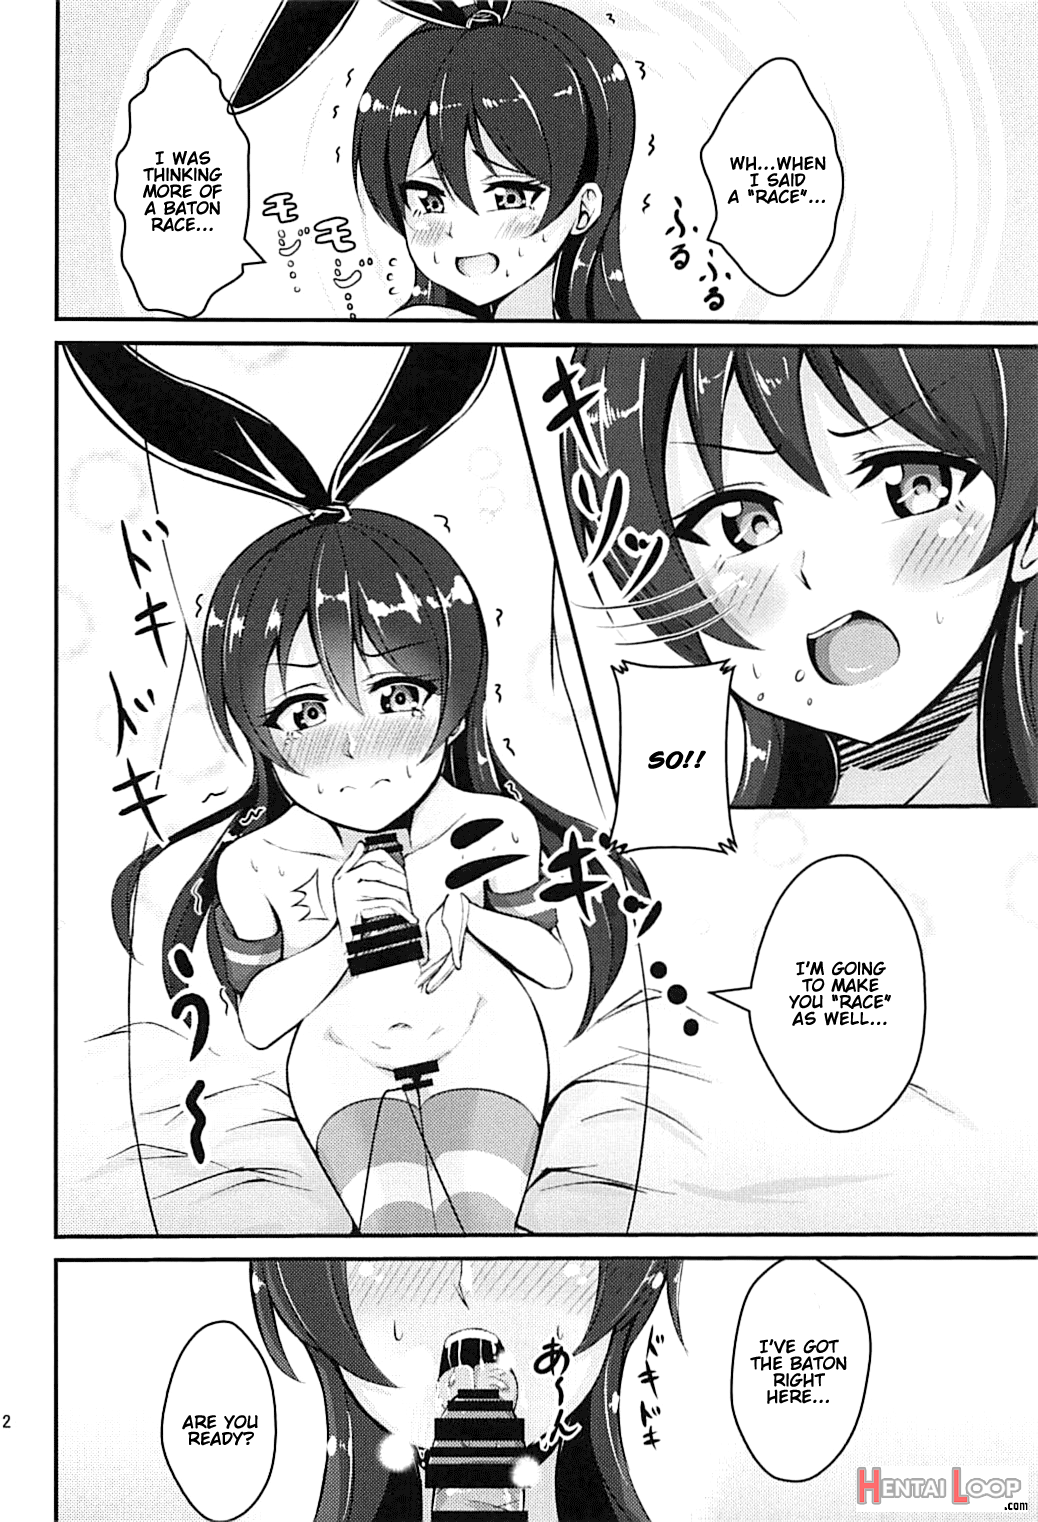 Race To The Finish With Umi-chan!! page 11